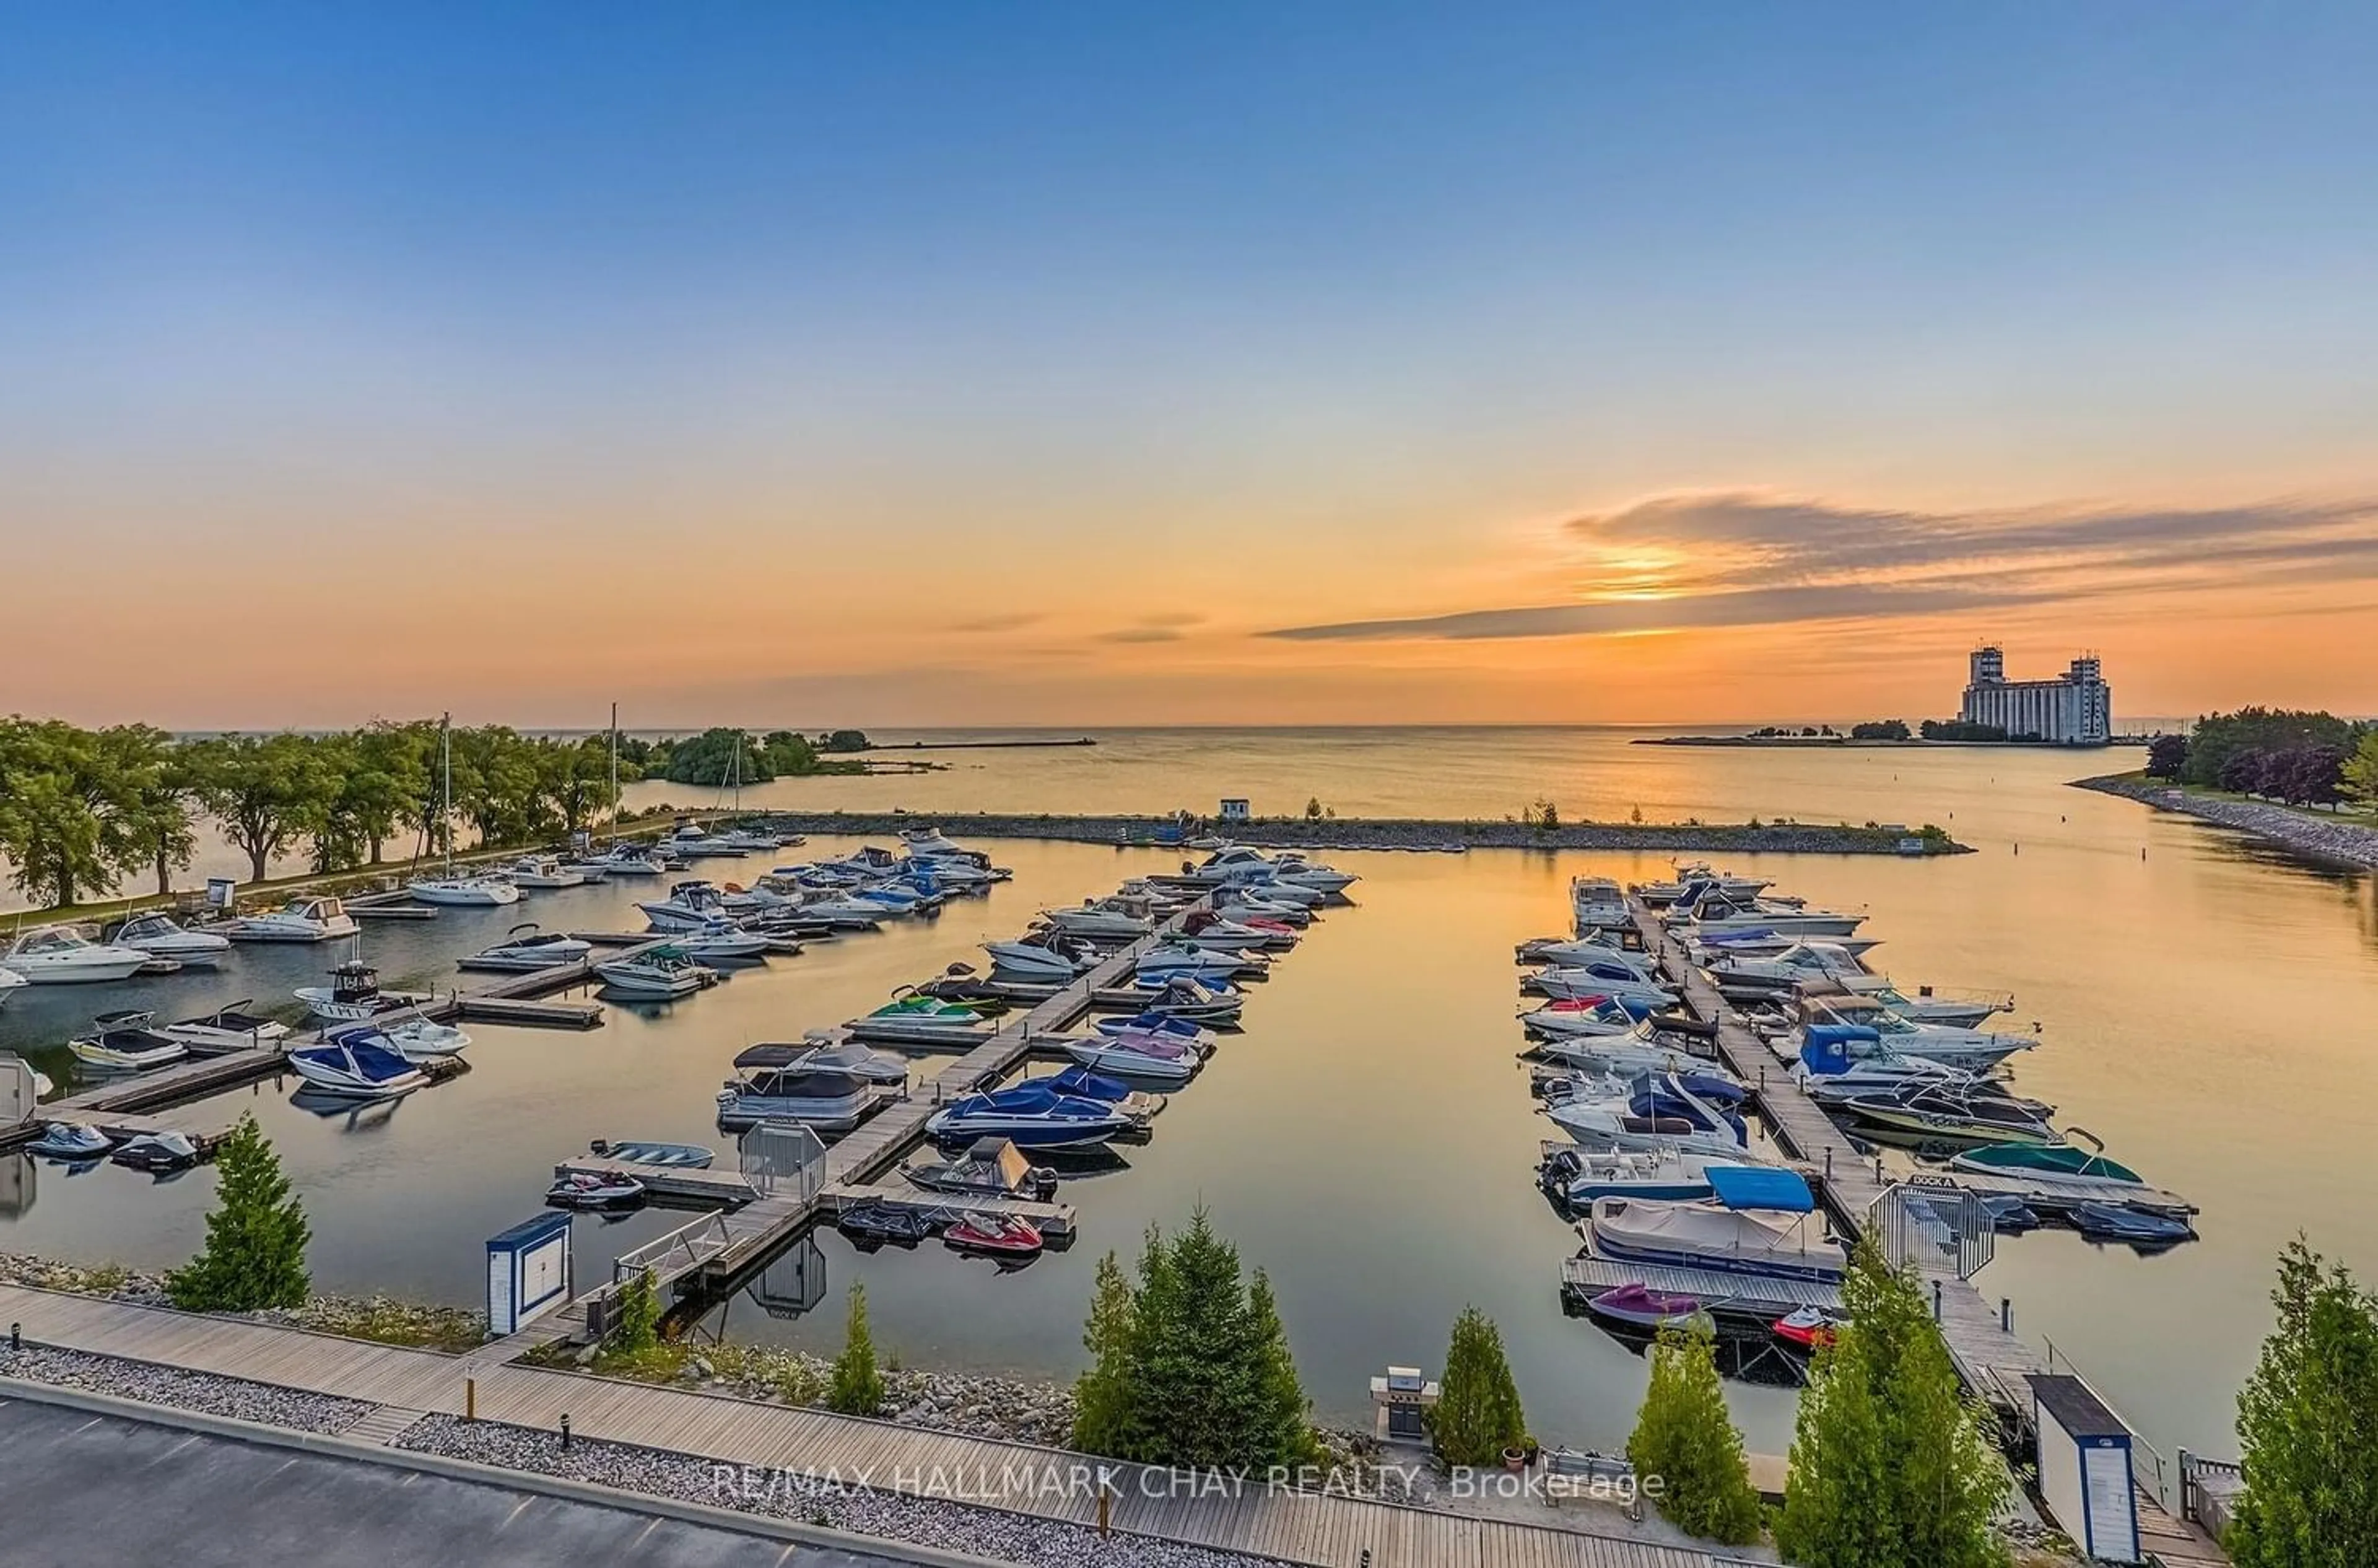 Lakeview for 9 Harbour St #2302/04, Collingwood Ontario L9Y 5C5